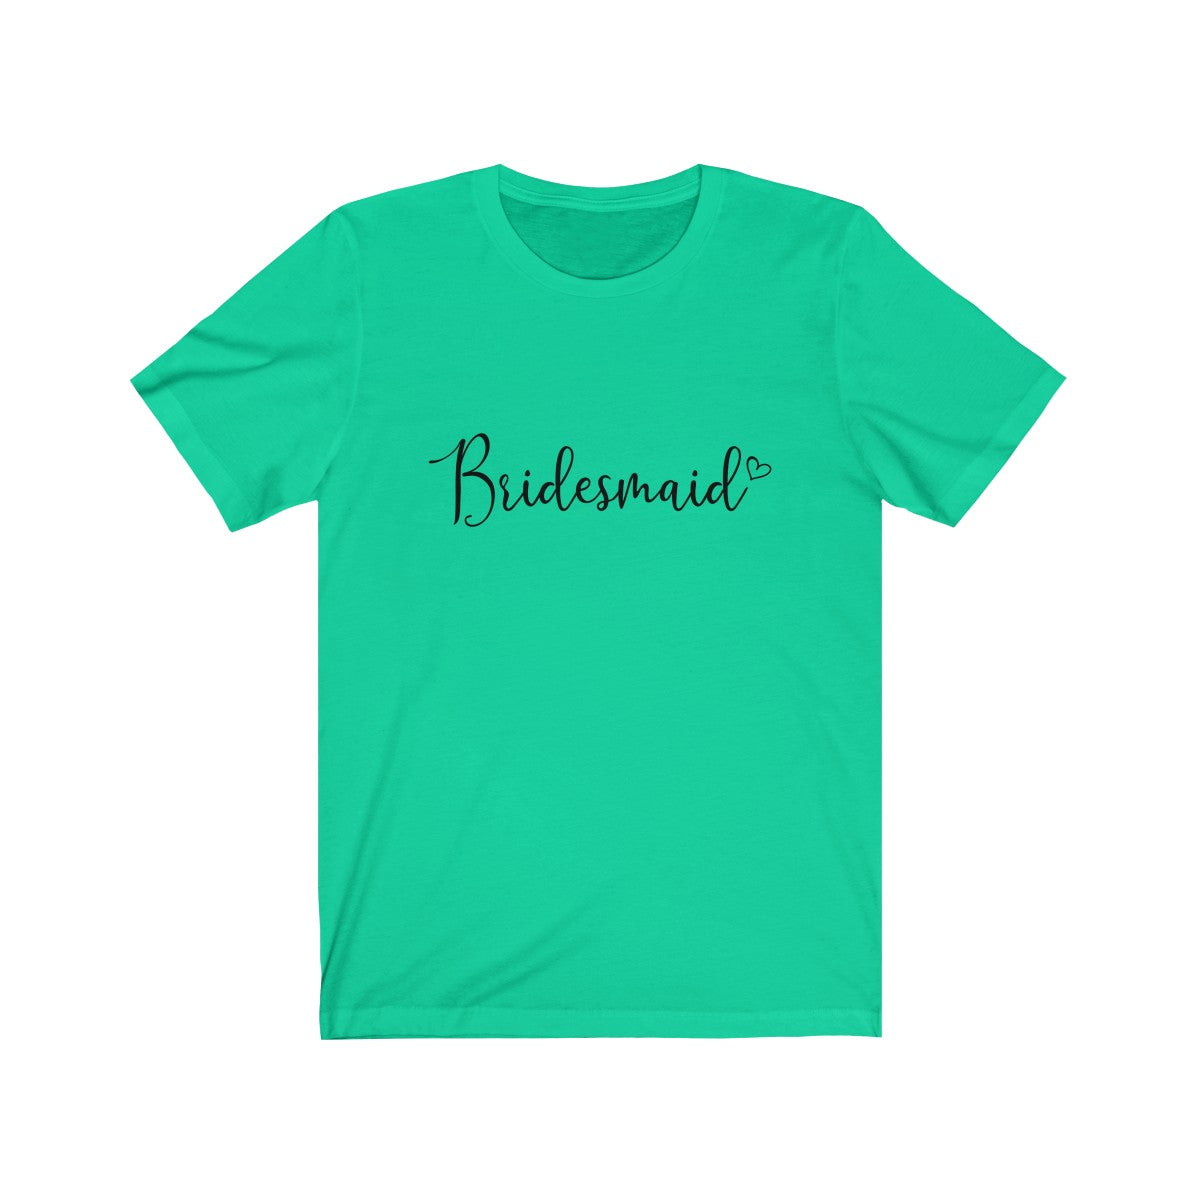 Tee Bridesmaid Heart white lettering - elrileygifts